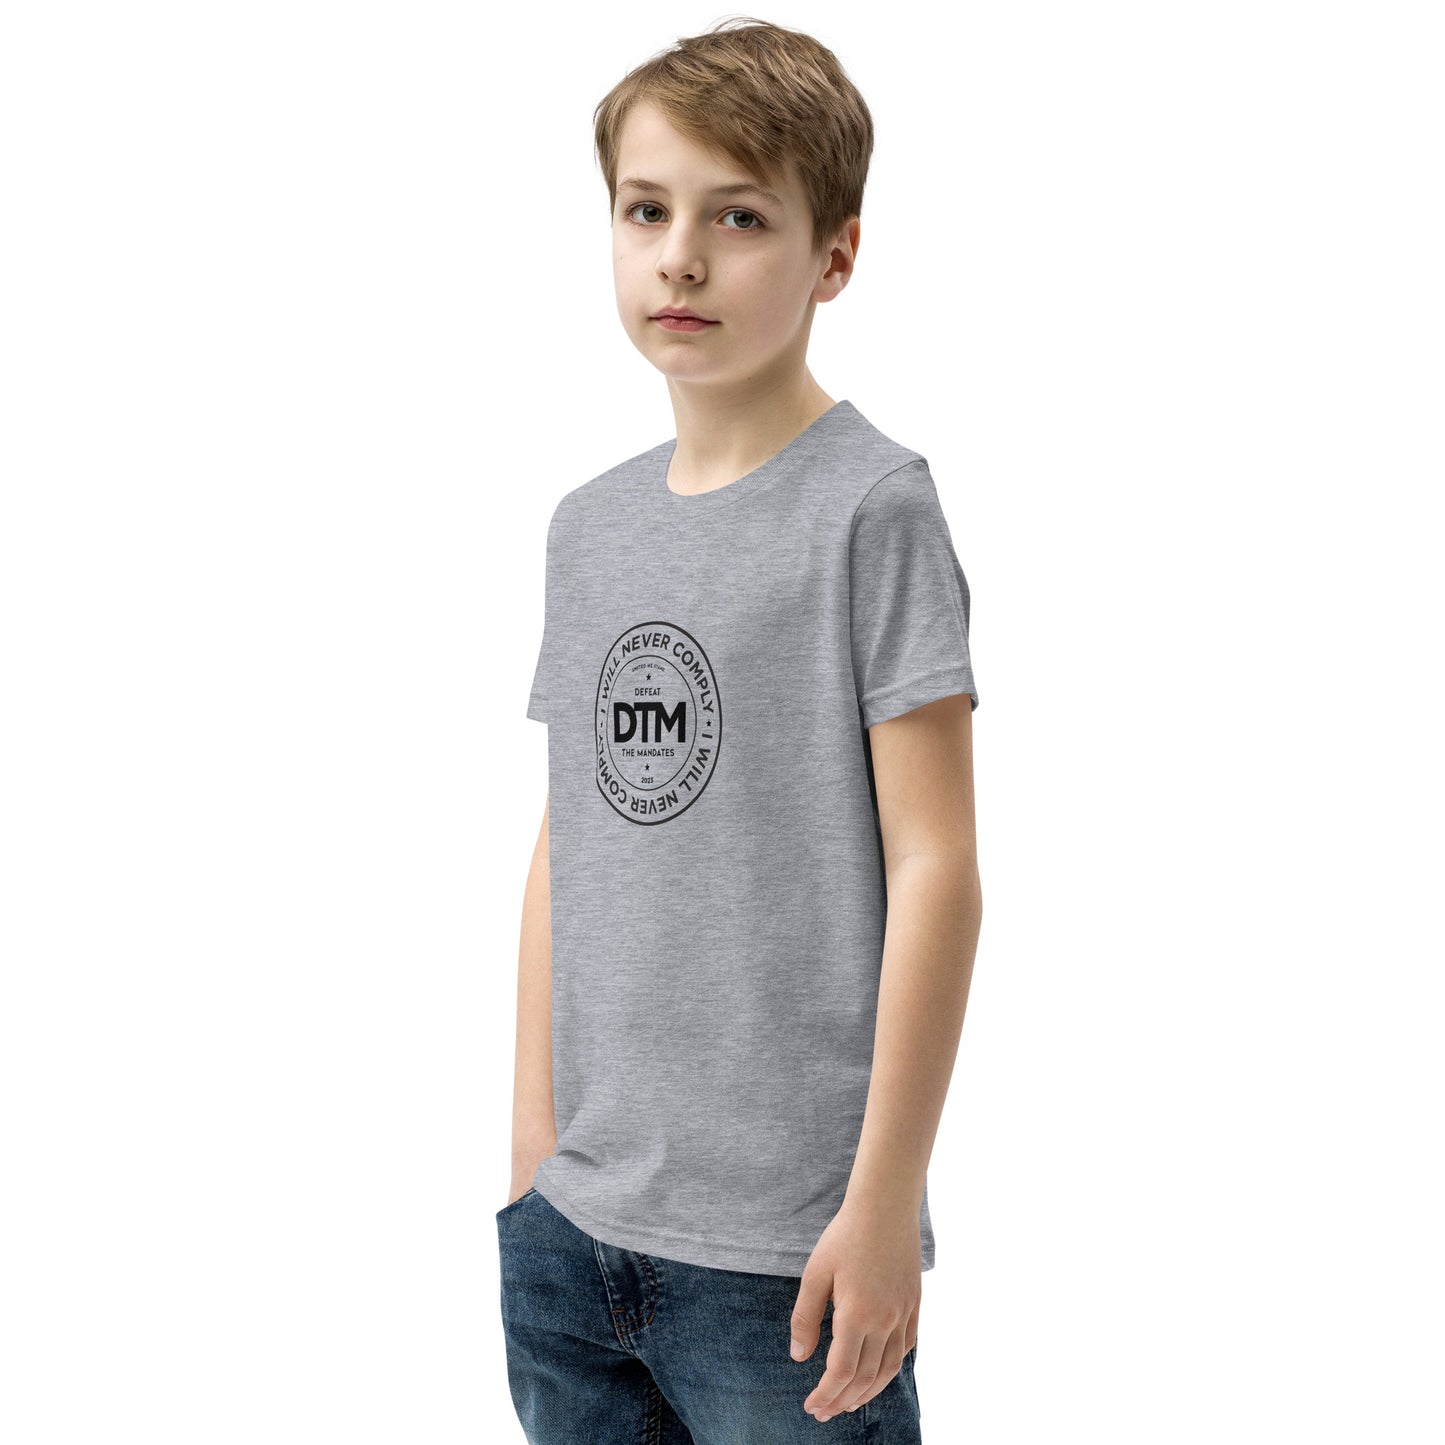 NEVER COMPLY Youth Short Sleeve T-Shirt